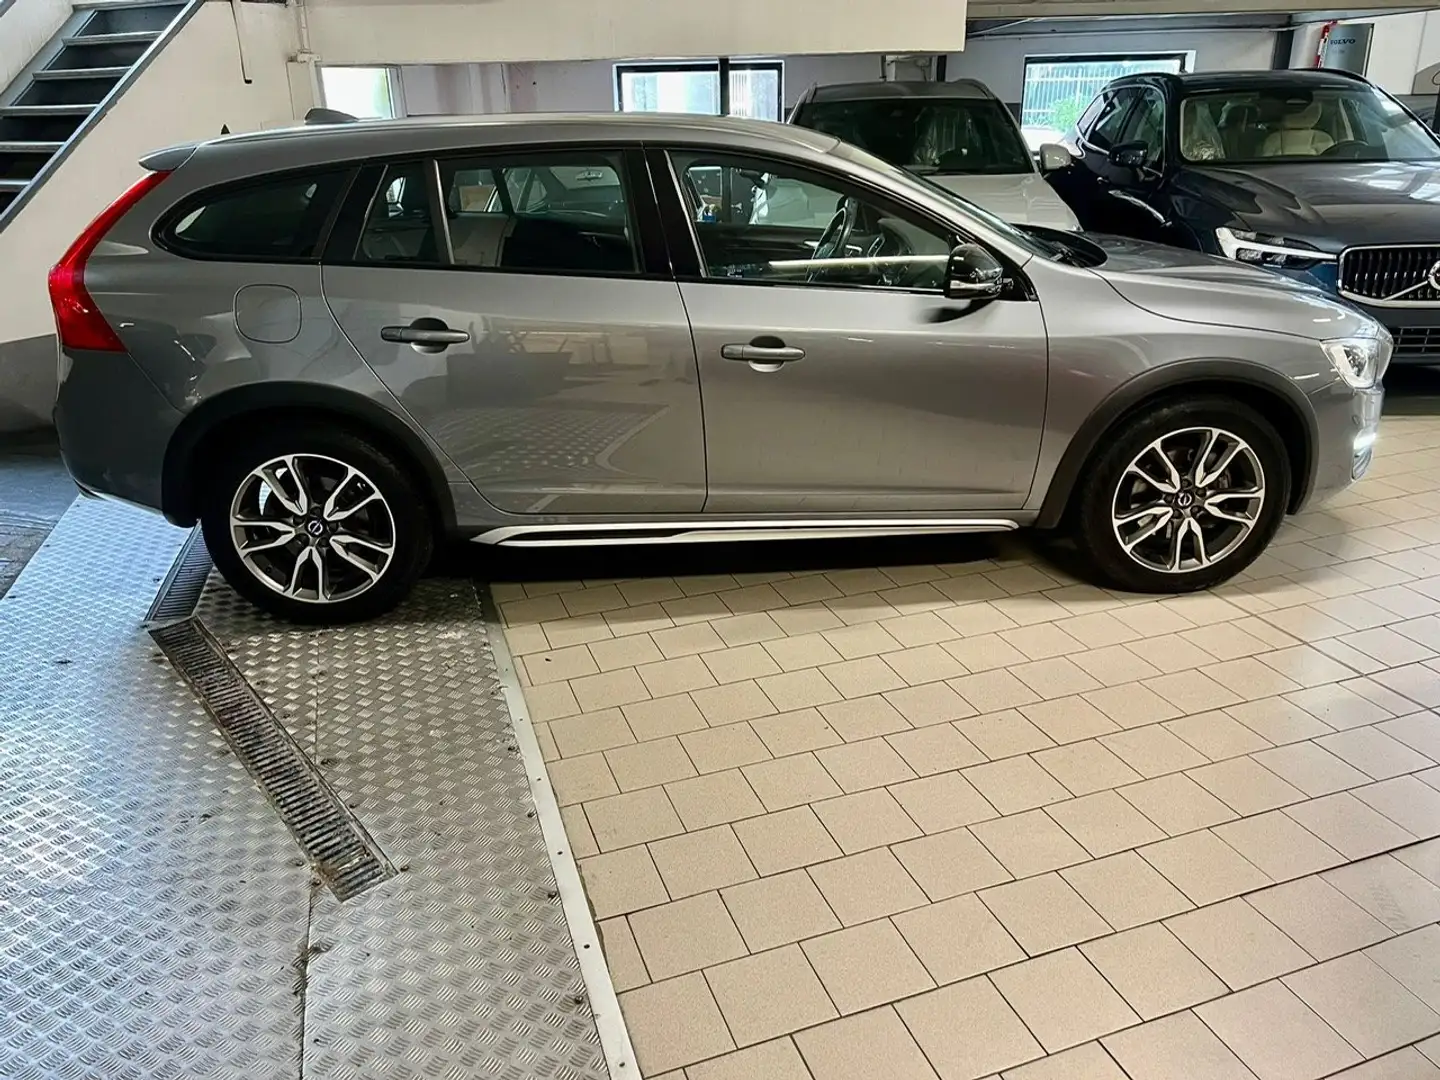 Volvo V60 Cross Country V60 Cross Country 2.4 d4 Momentum awd geartronic siva - 2